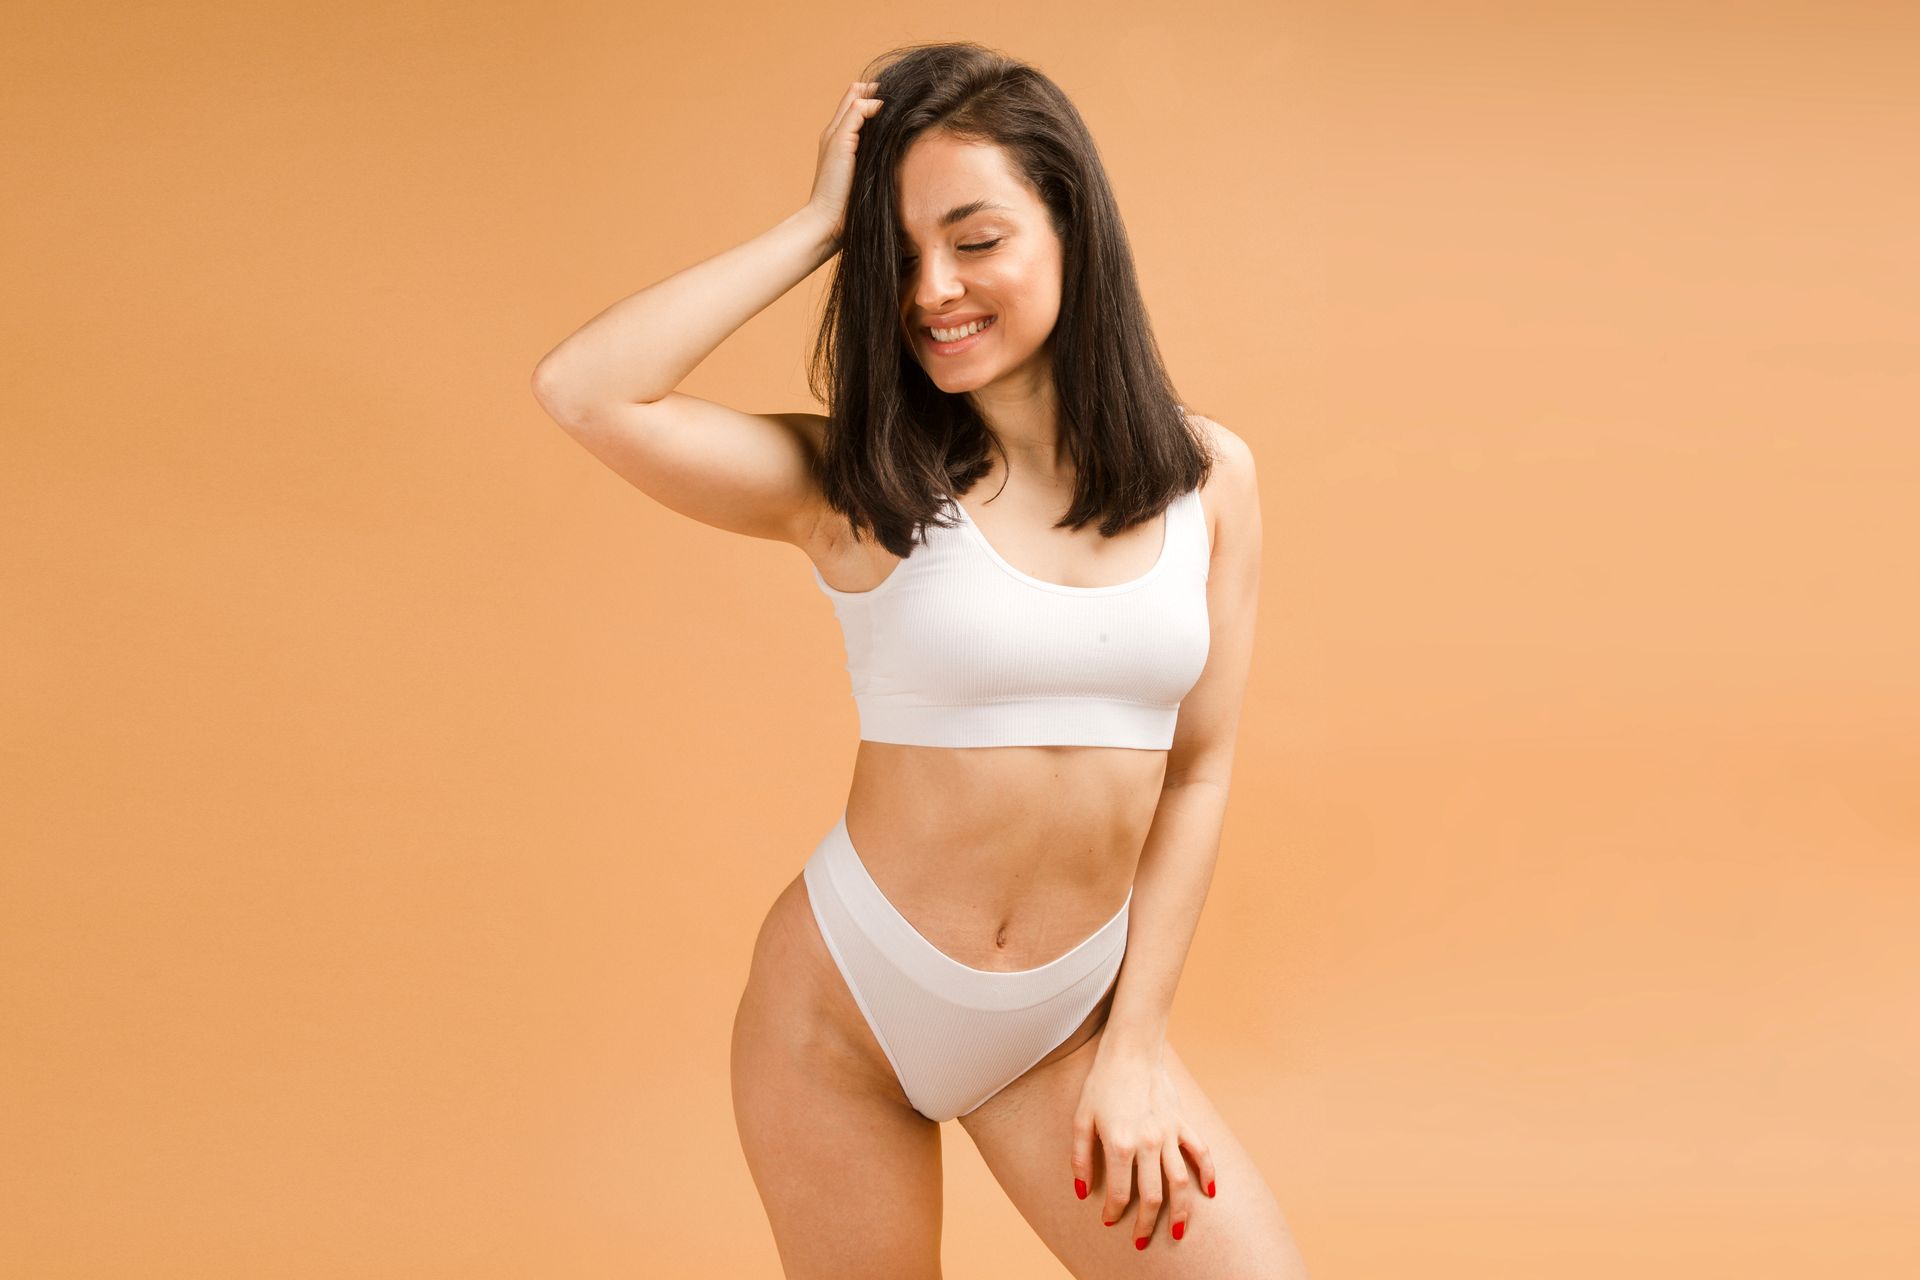 a woman in white underwear is standing on a beige background .